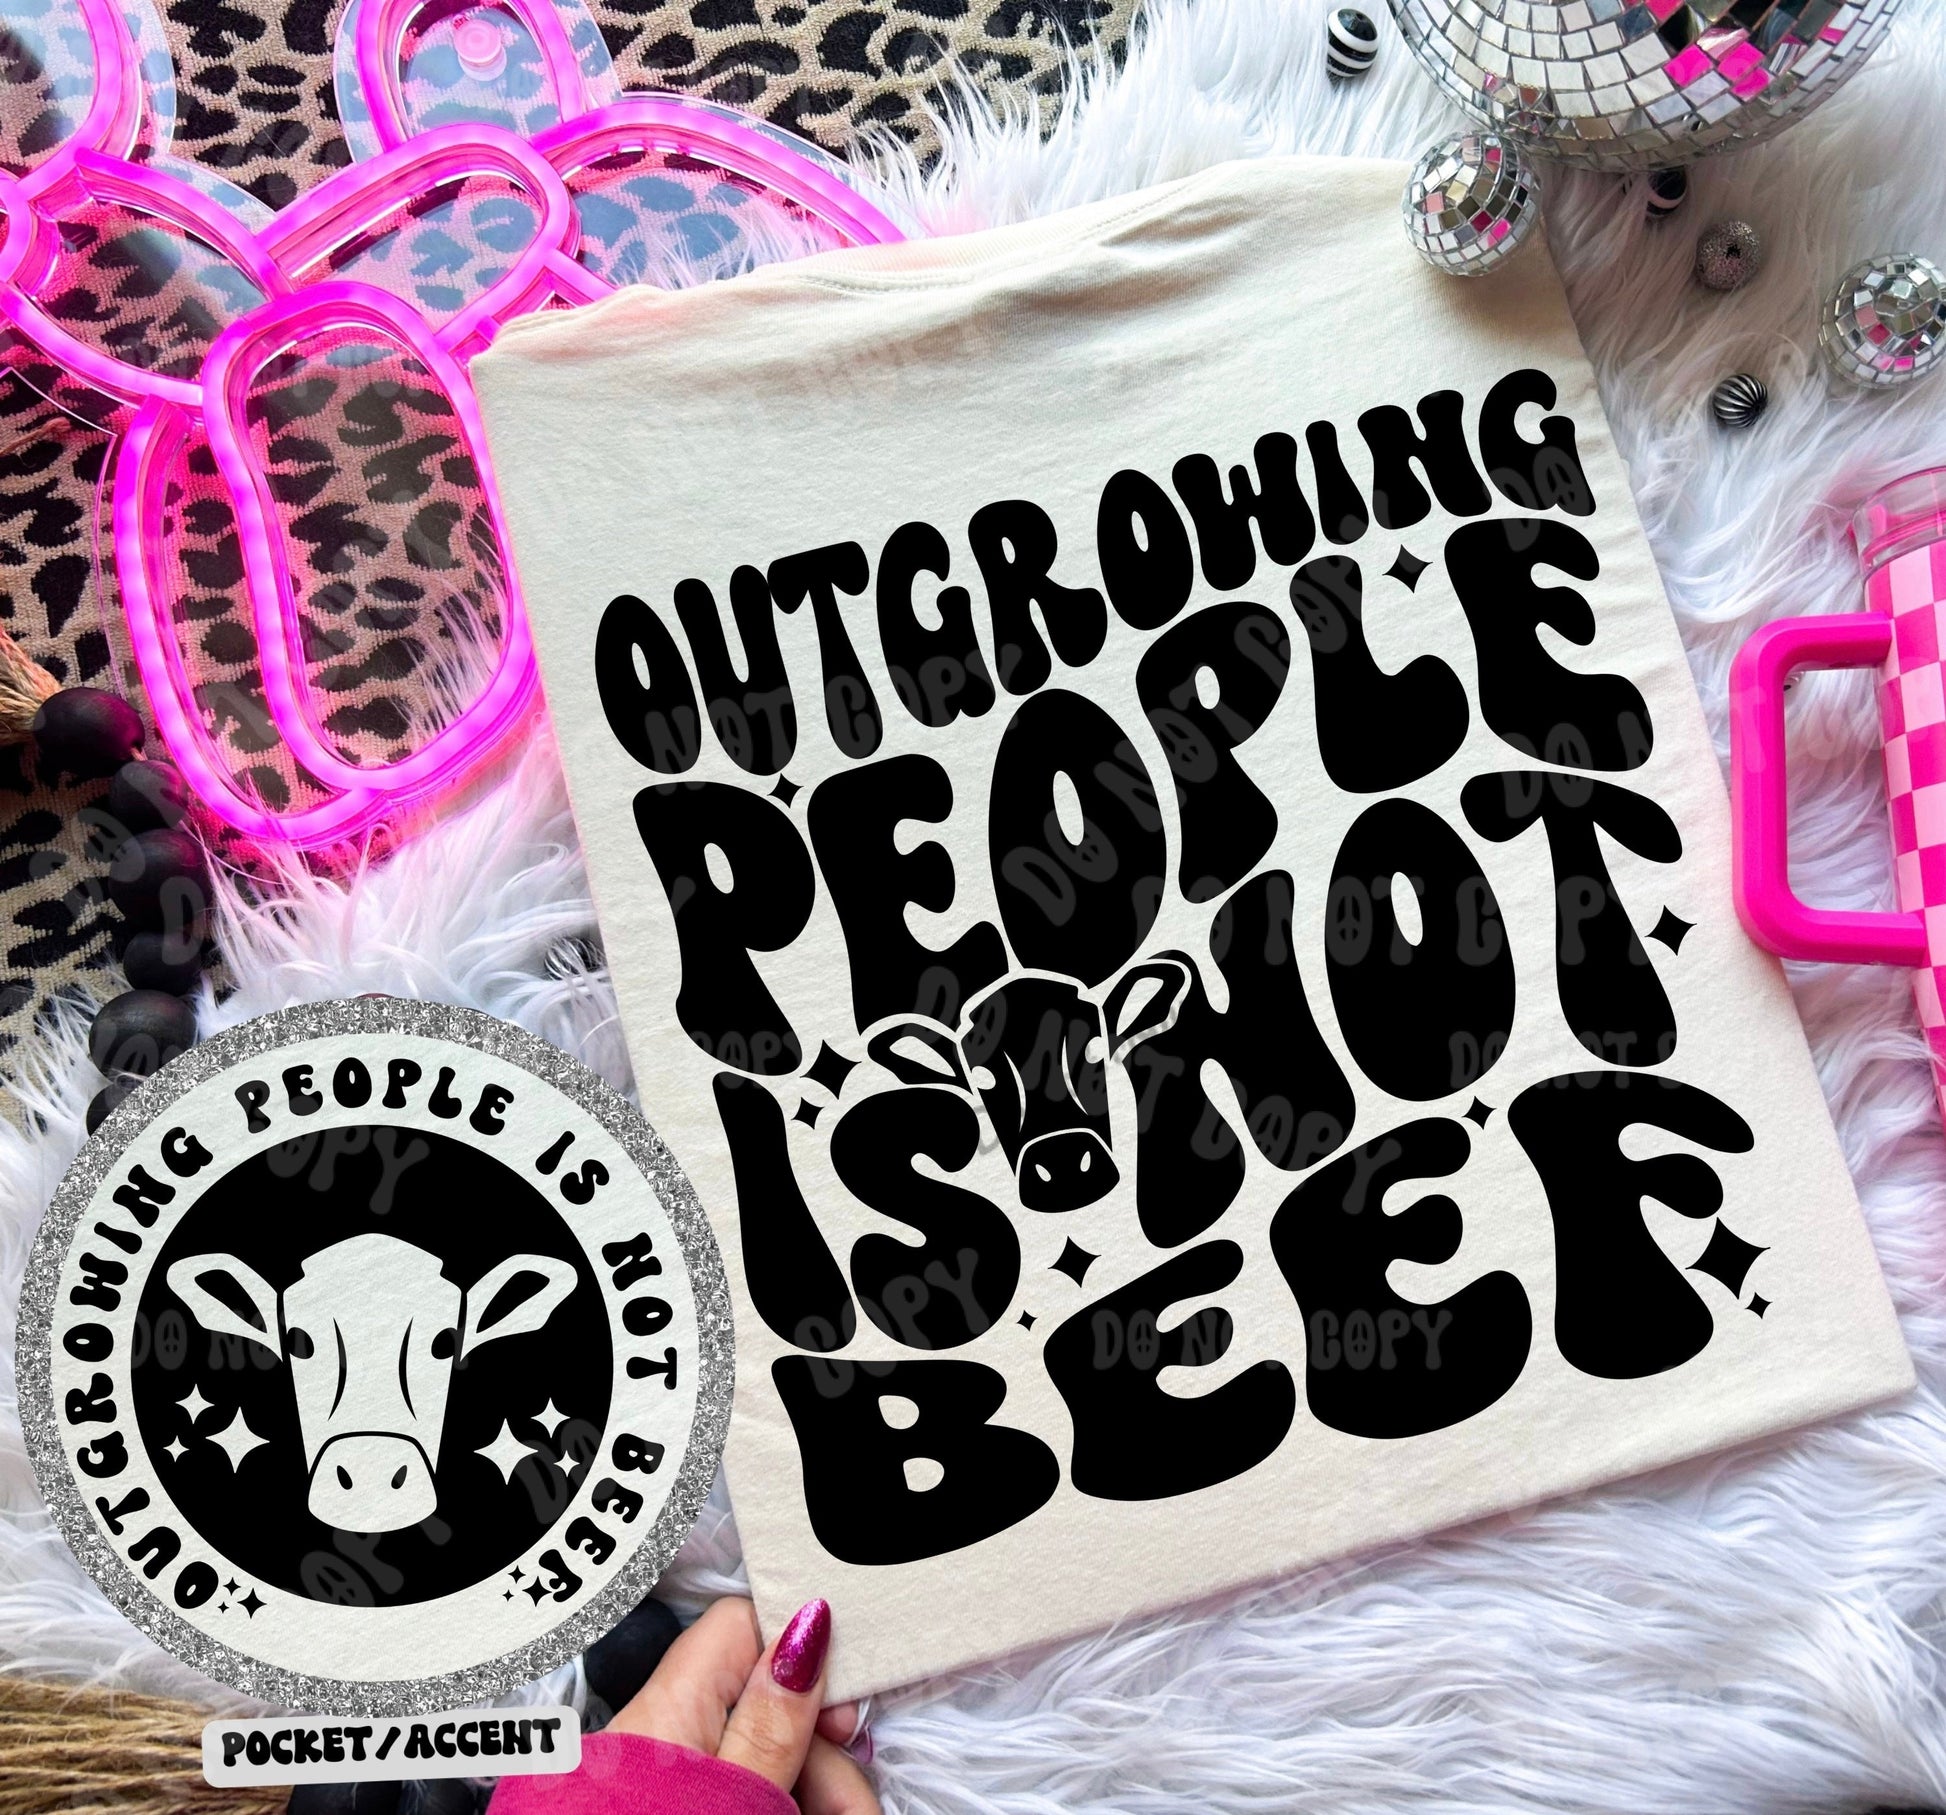 Outgrowing People is Not Beef T-shirt